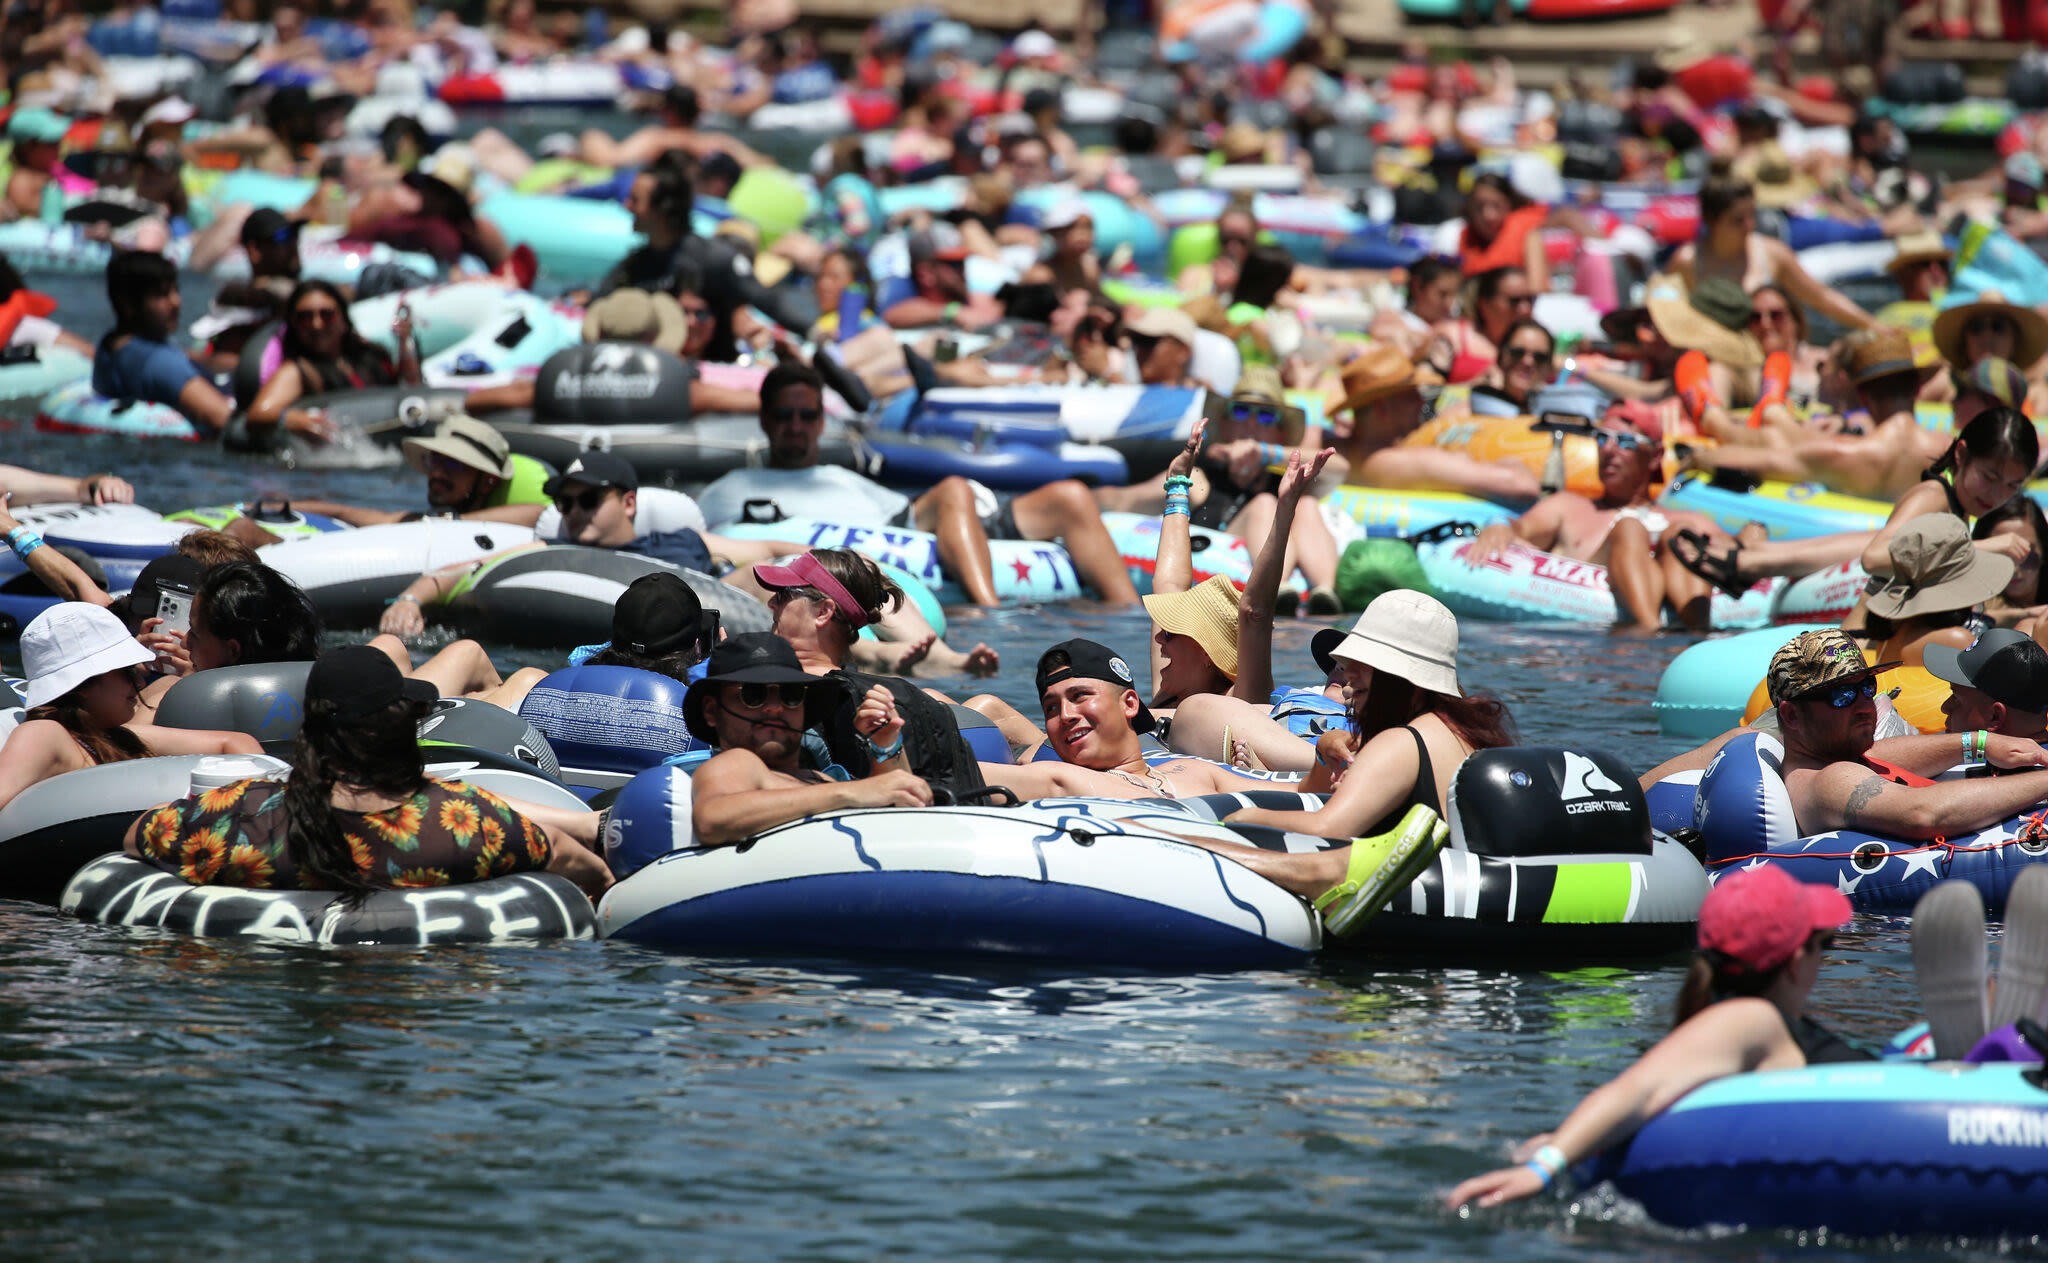 Can bans and curfews: Make sure you know the new rules for tubing